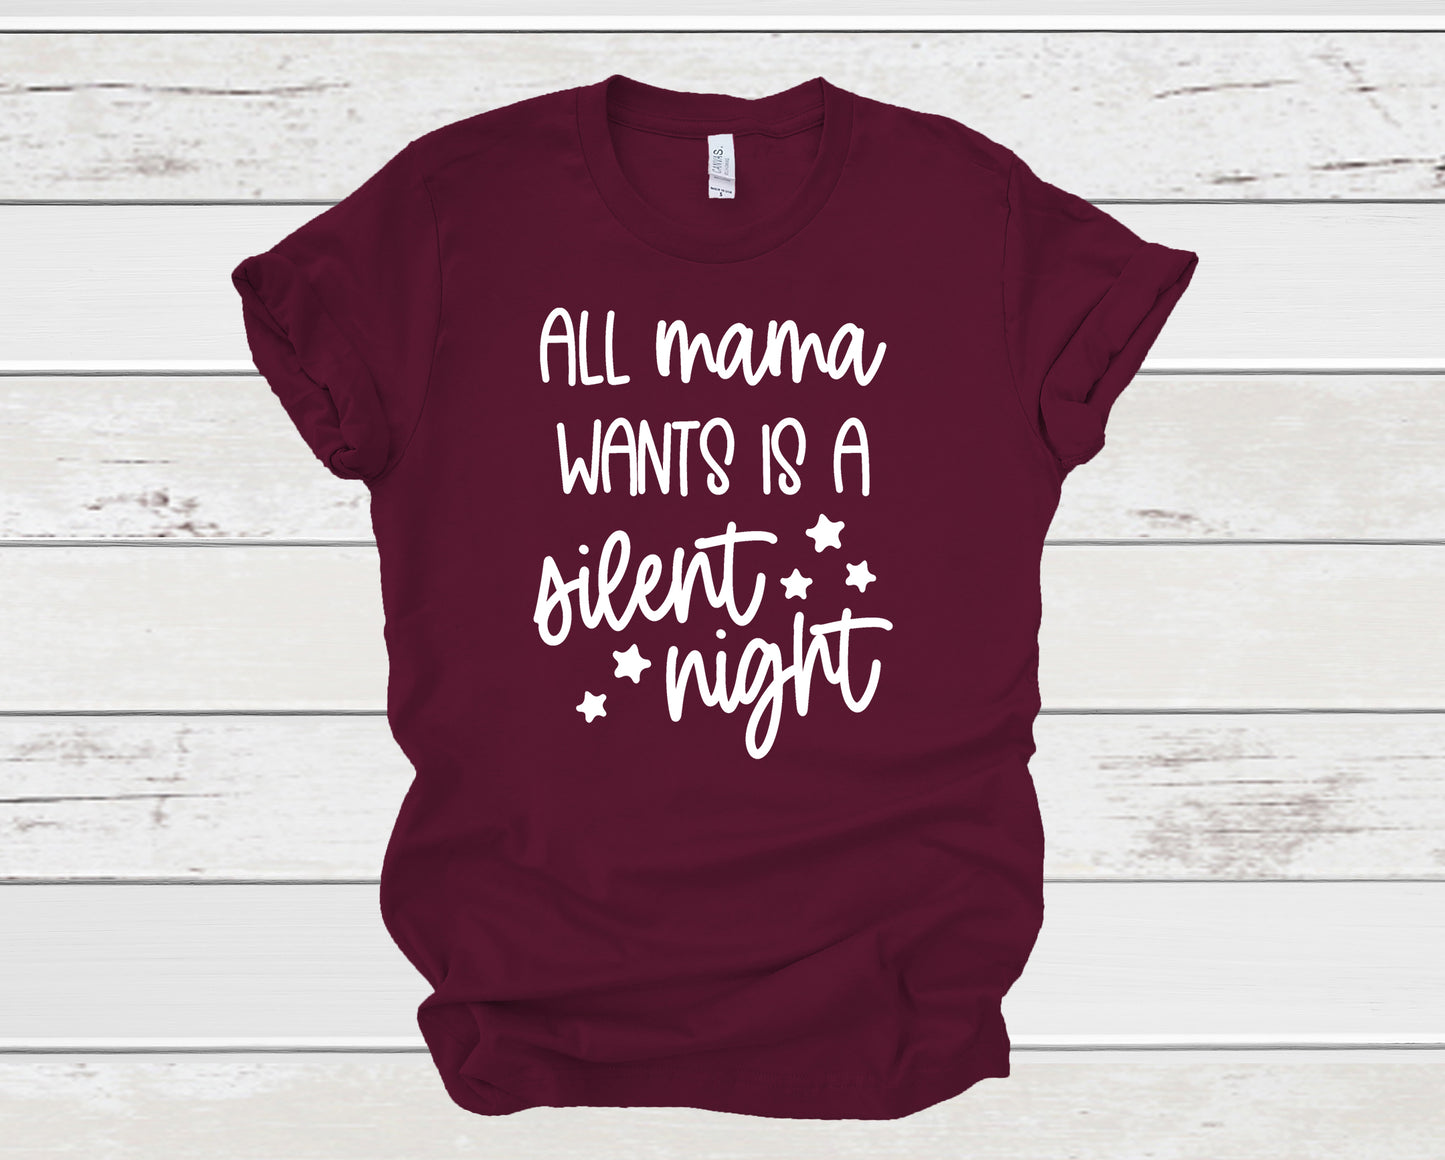 All mama wants is a silent night